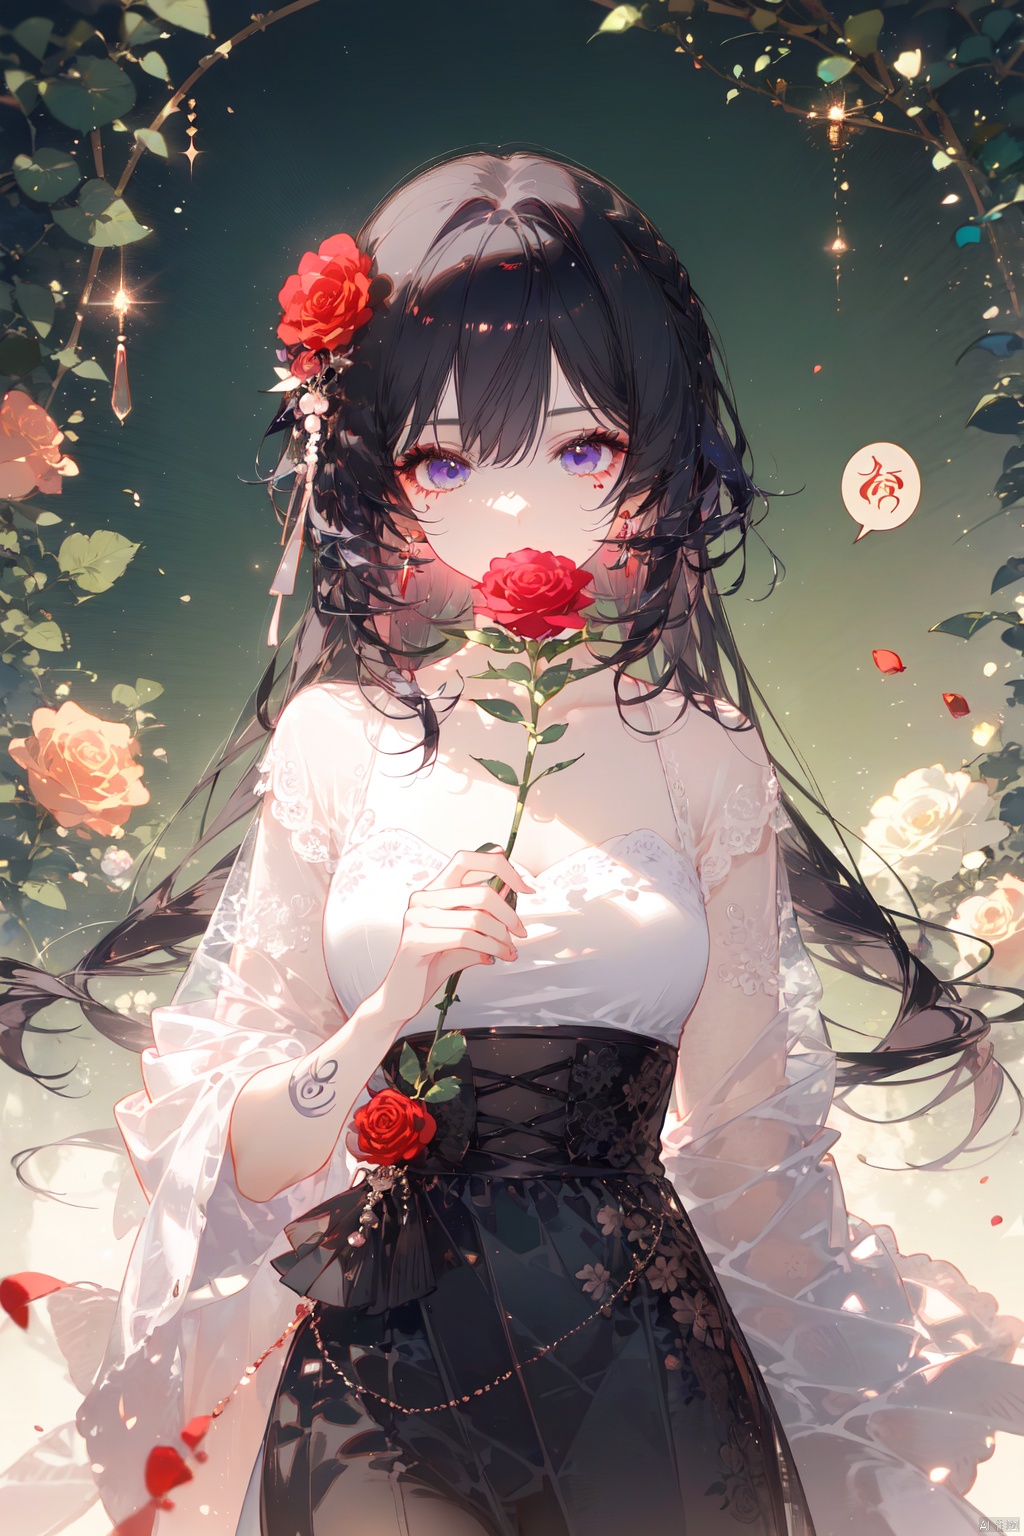 1girl, black_flower, black_hair, black_rose, blue_rose, bouquet, condom, condom_in_mouth, condom_wrapper, confession, floral_background, flower, flower_ornament, green_flower, holding_bouquet, holding_flower, leaf, long_hair, orange_flower, pink_flower, pink_rose, plant, pubic_tattoo, purple_flower, purple_rose, red_flower, red_rose, rose, rose_petals, rose_print, solo, spoken_squiggle, squiggle, tattoo, thorns, tulip, vase, vines, white_flower, white_rose, yellow_rose